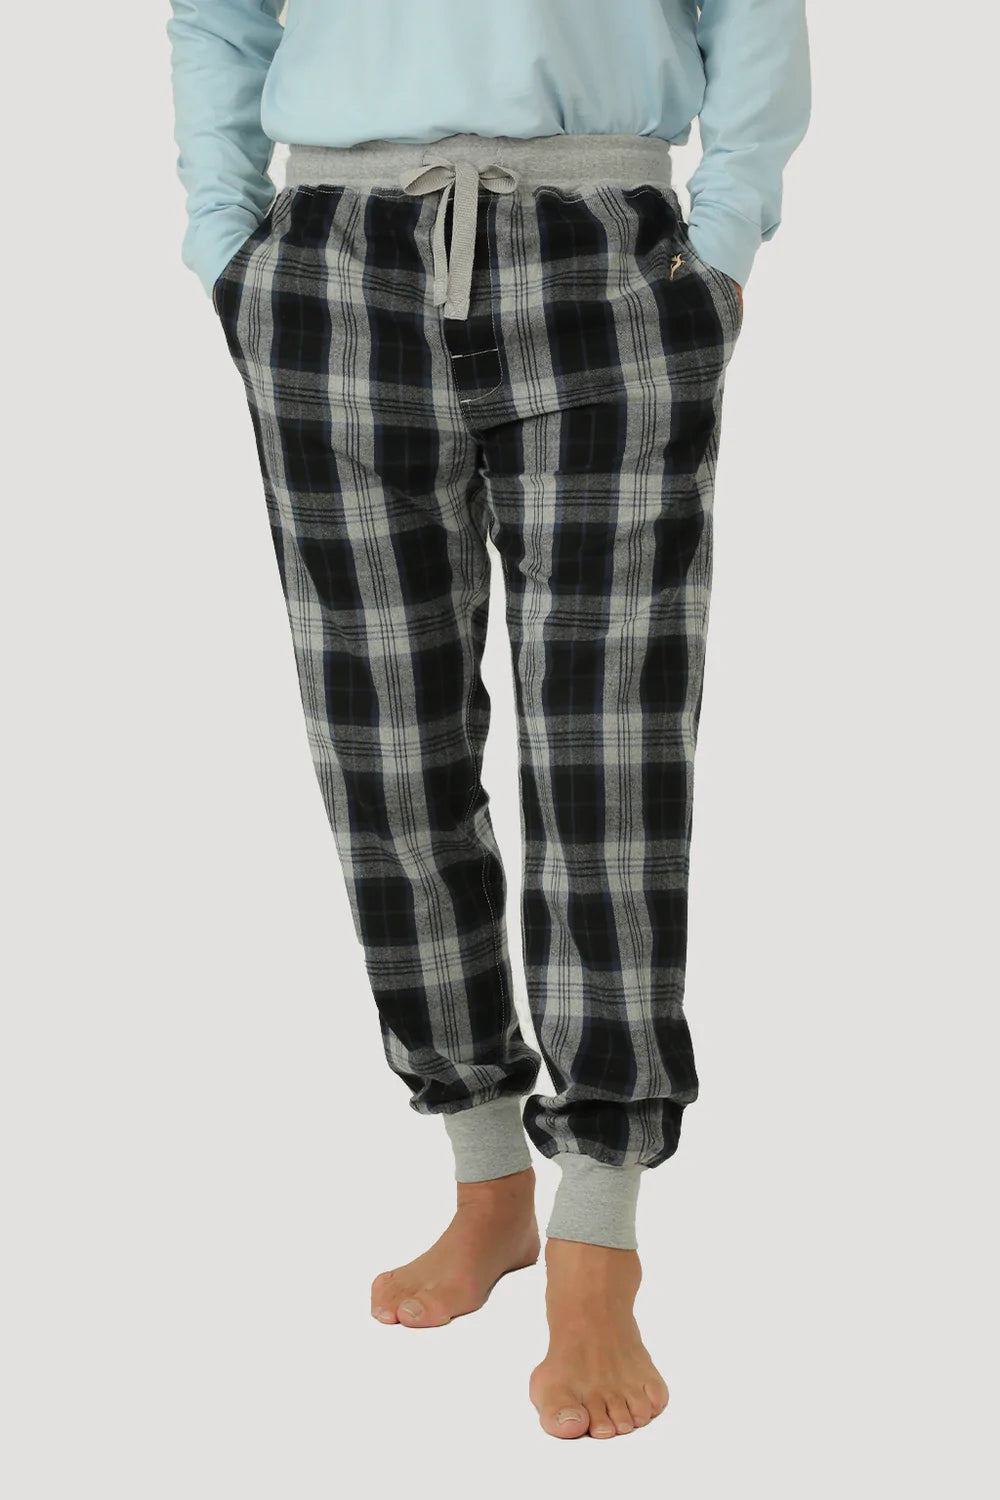 FLANNEL LOUNGE JOGGER - BLK/GRY/BLU